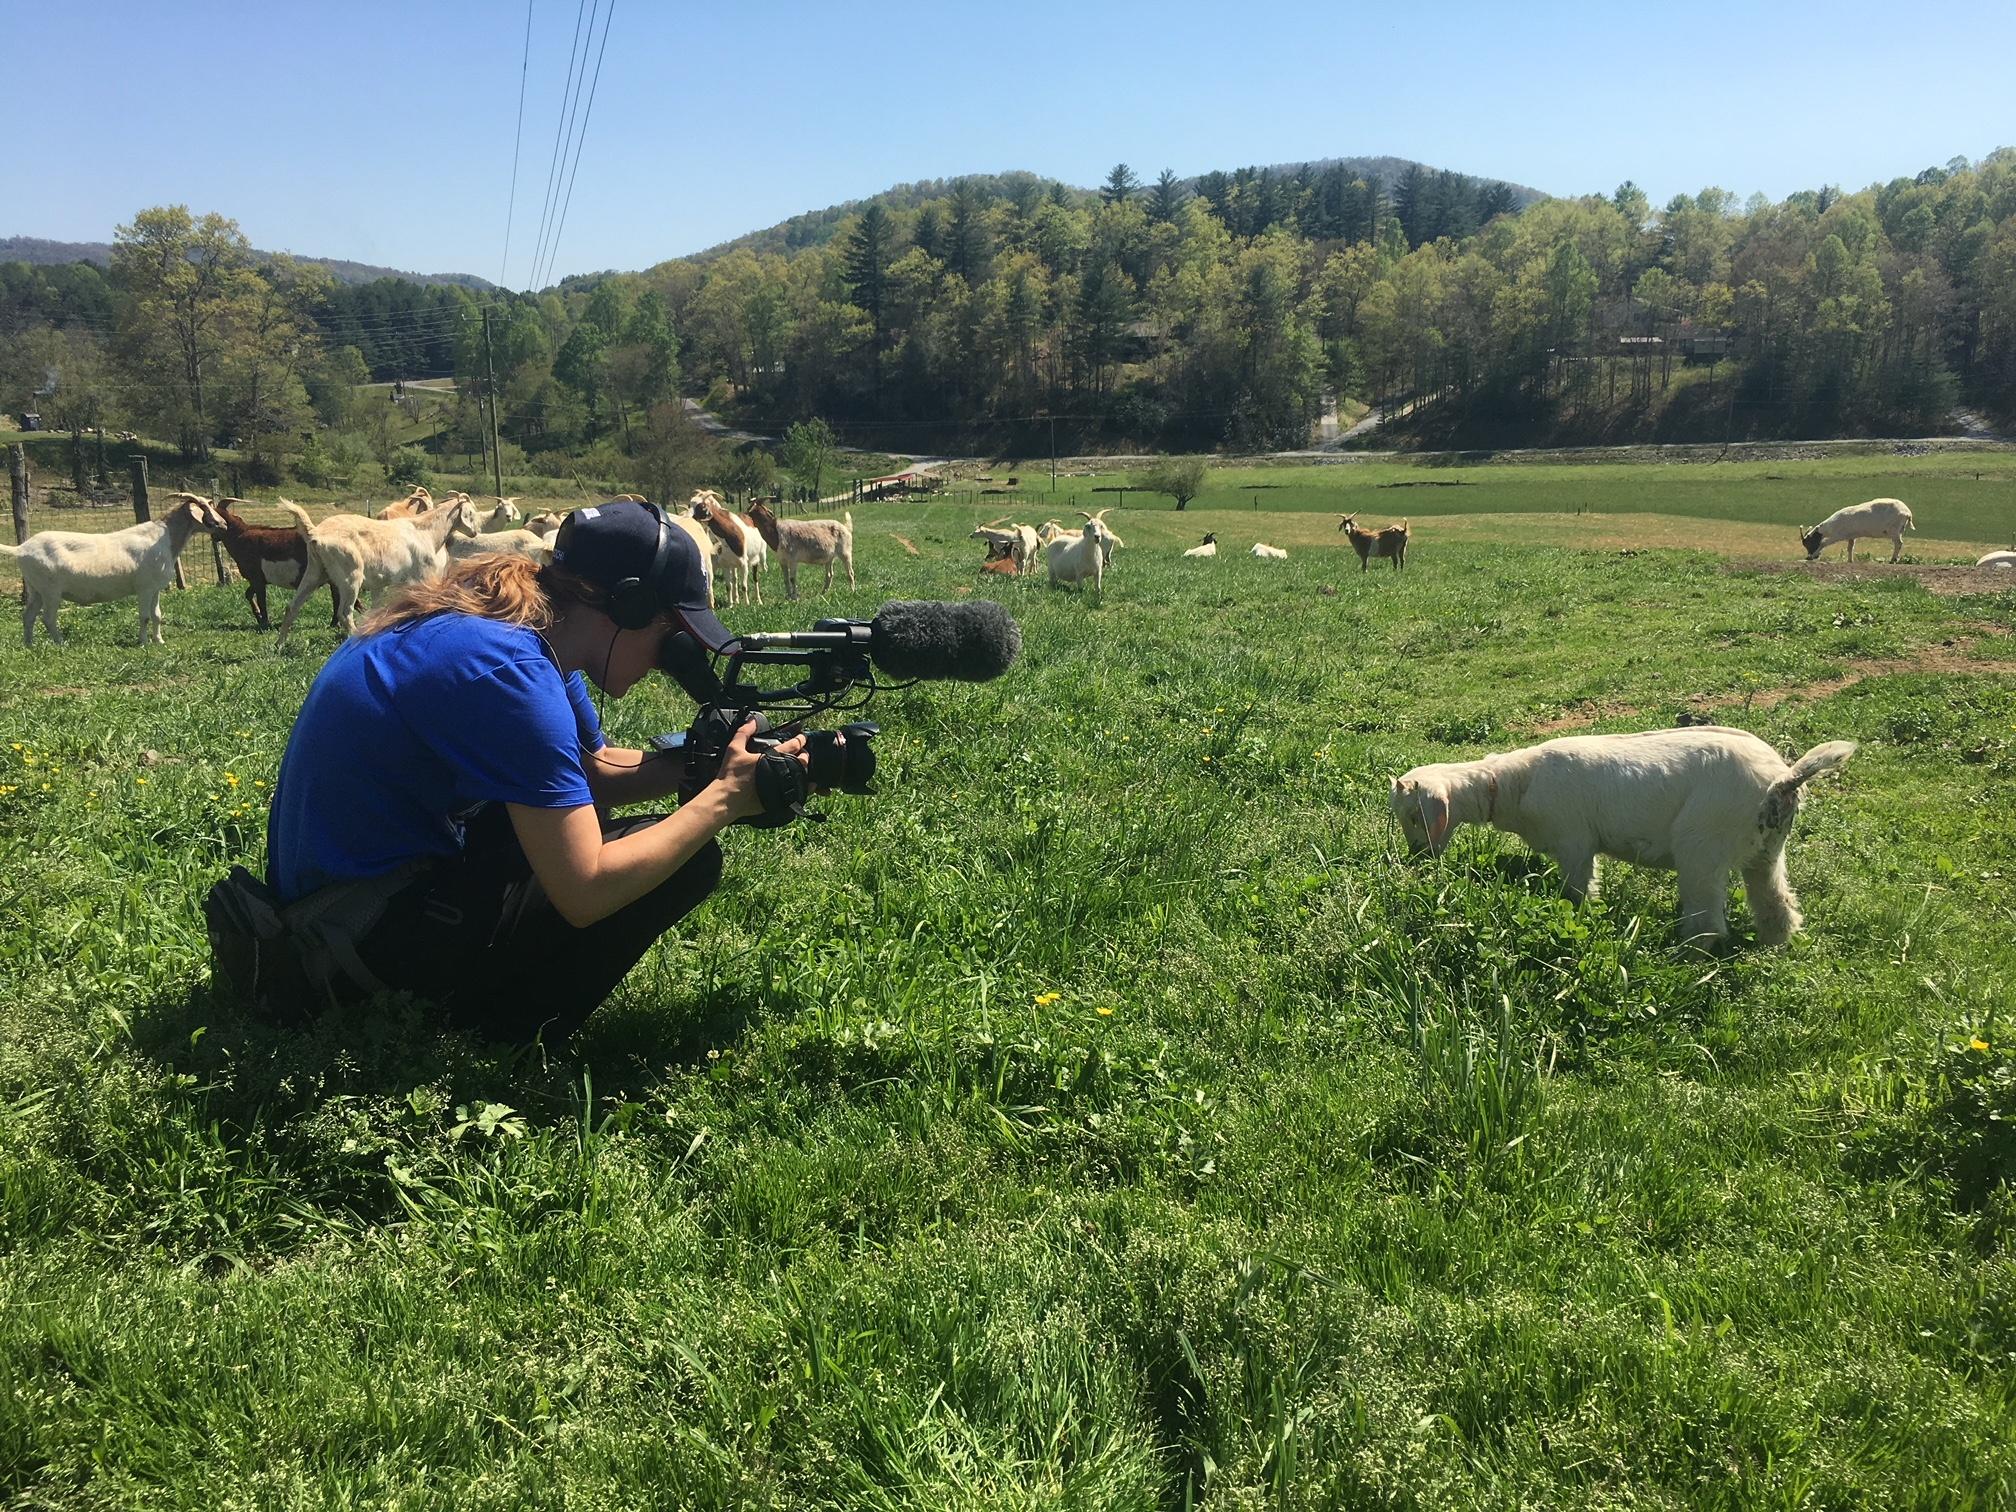 Blonde crew member sits in front of goat while holding up a camera